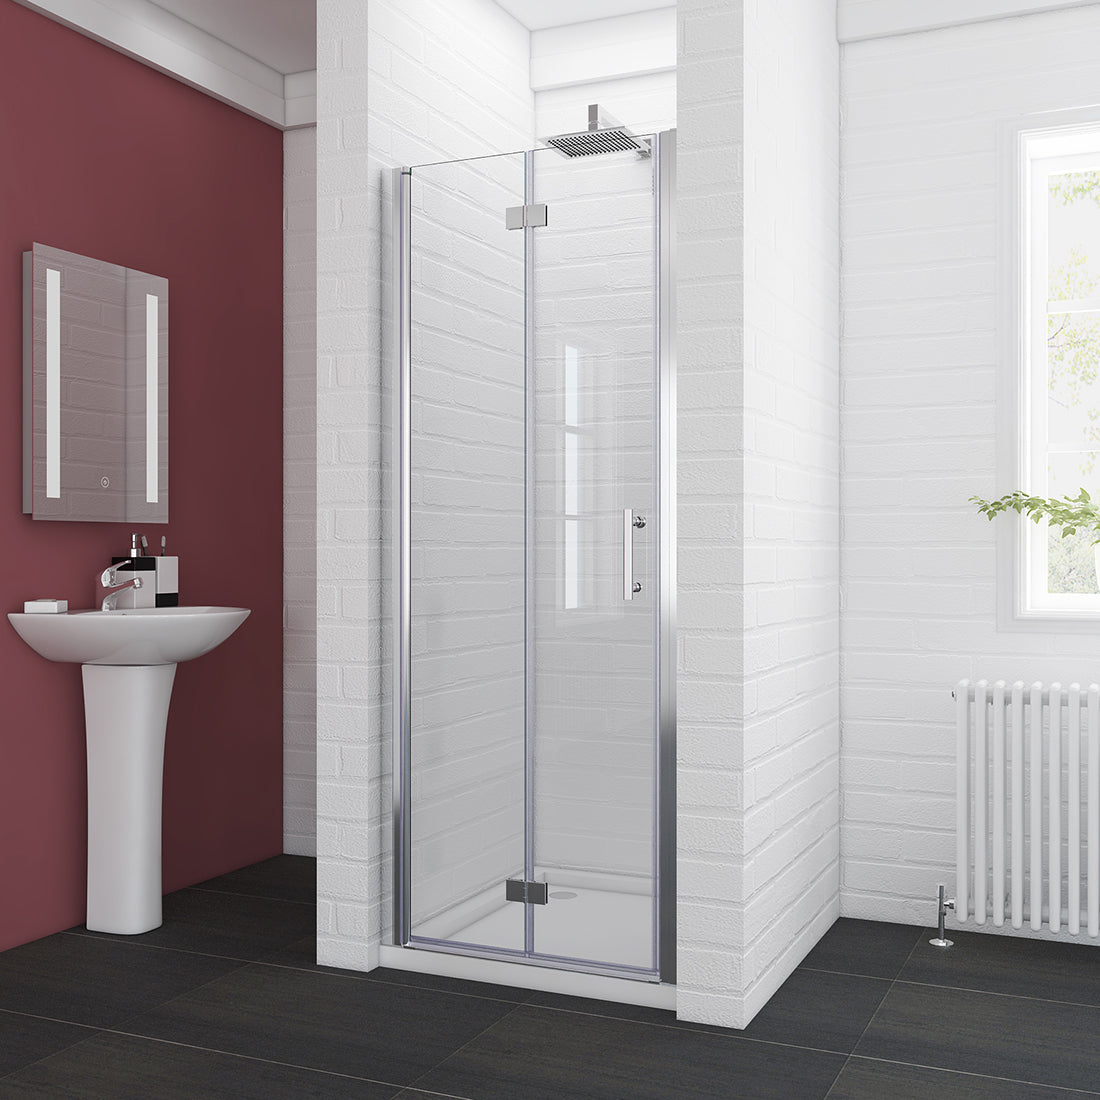 THINGS YOU NEED TO KNOW ABOUT SHOWER ENCLOSURE